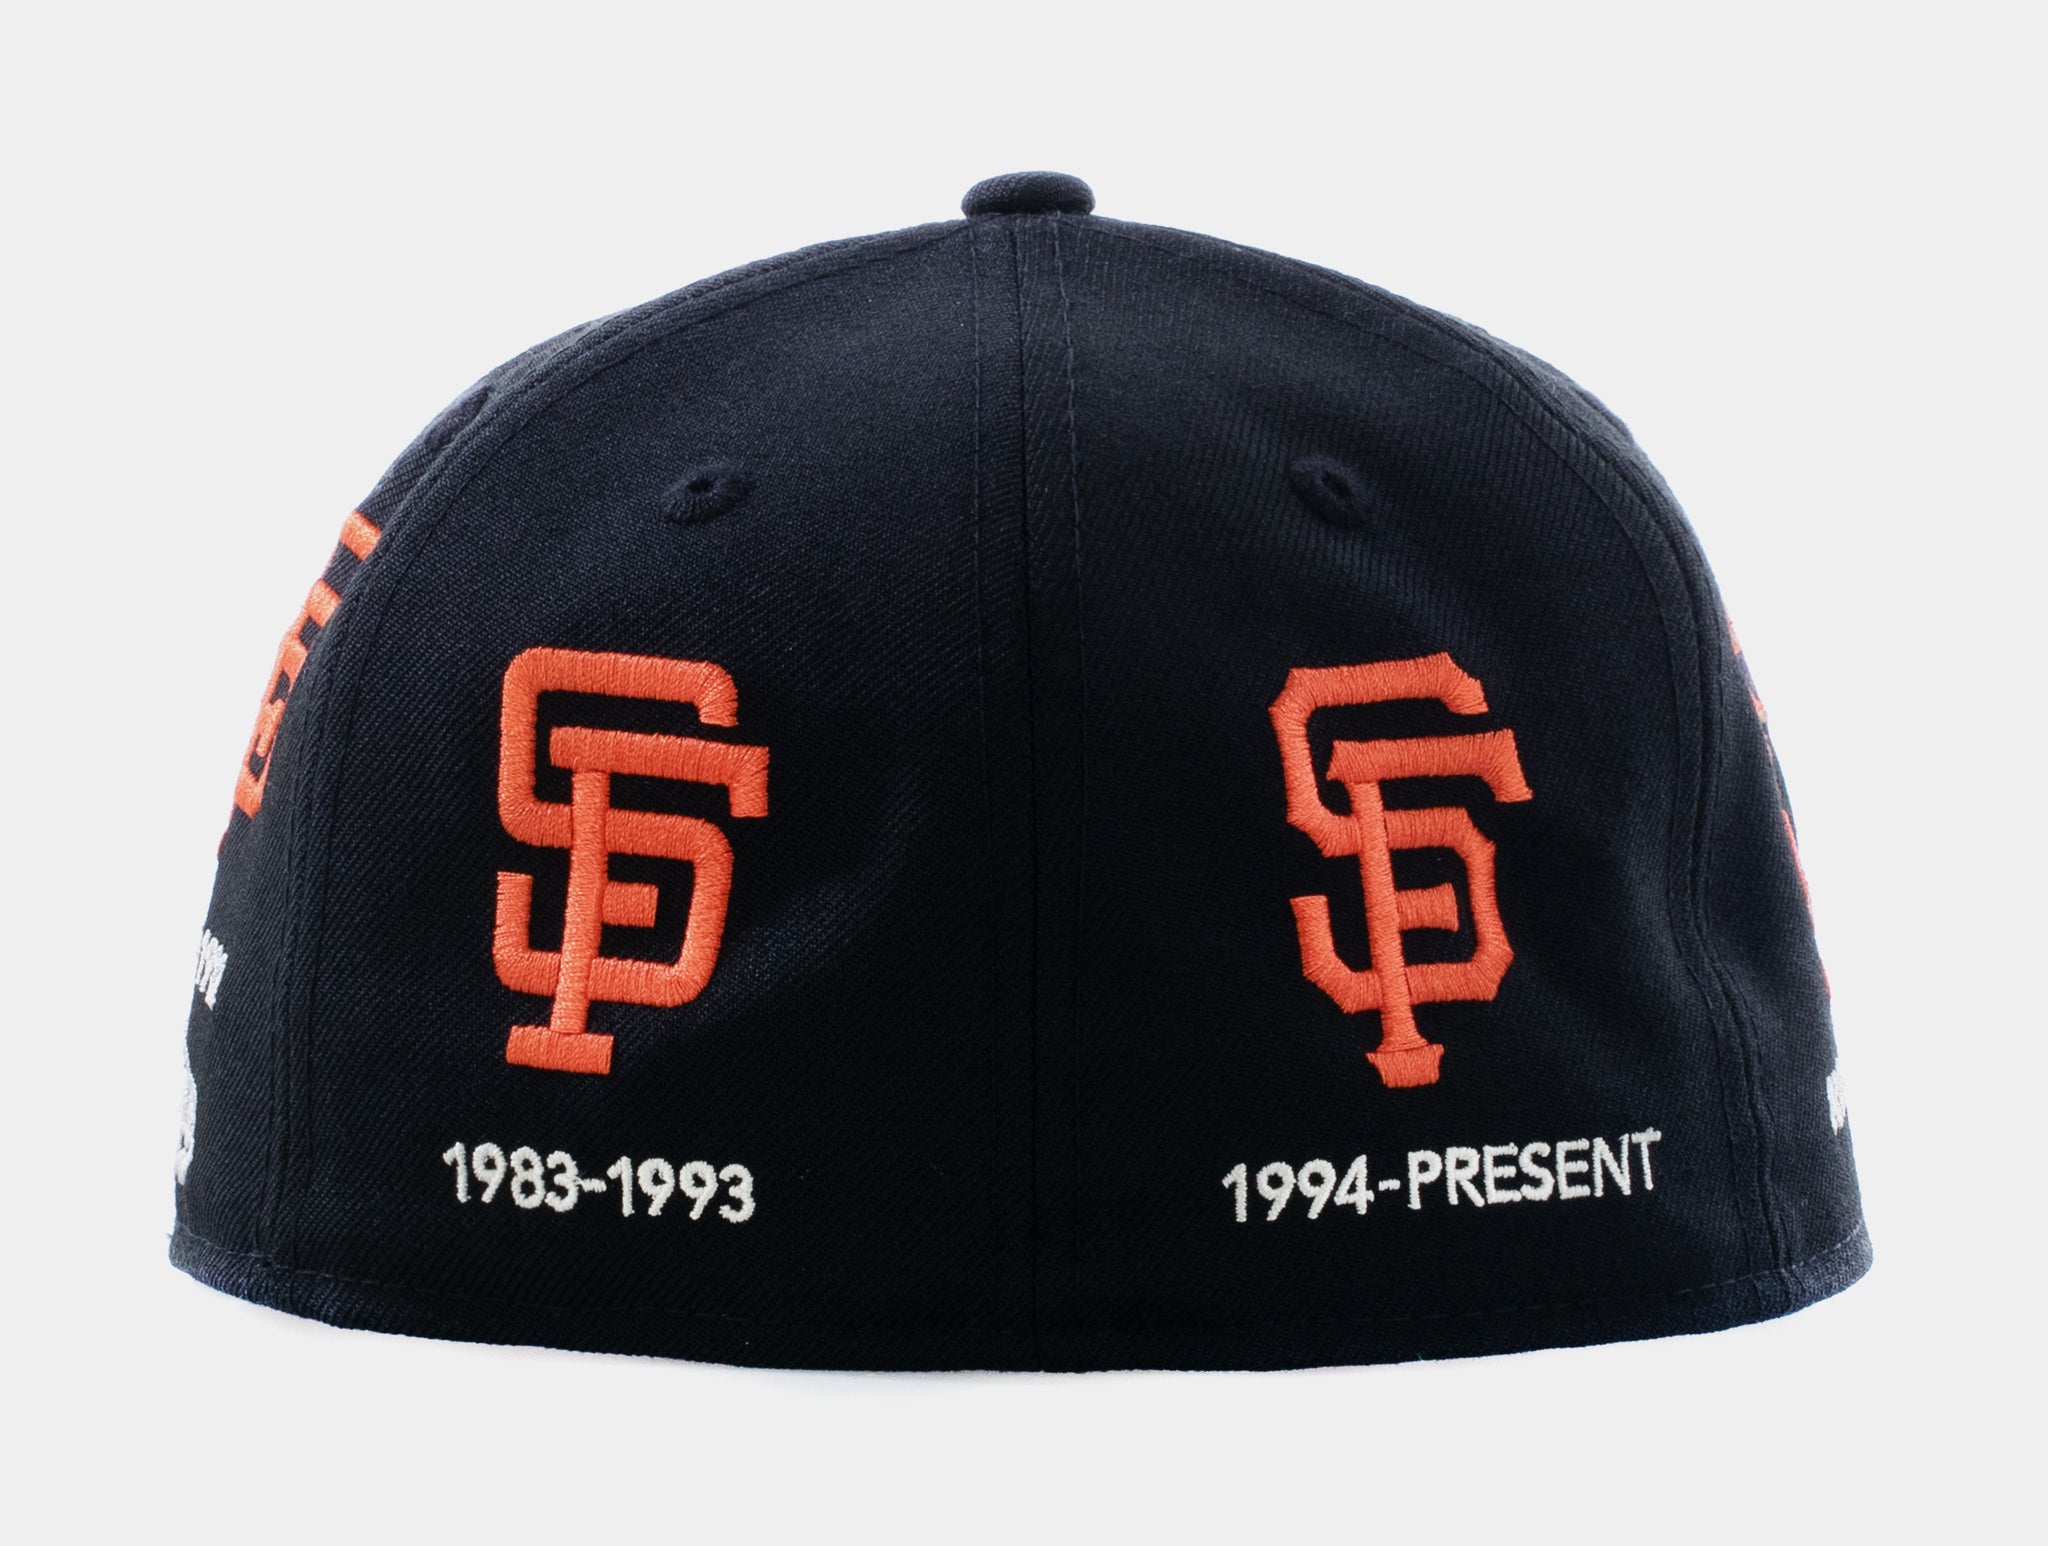 Black used 7 New Era San Francisco Giants Hat with Patches